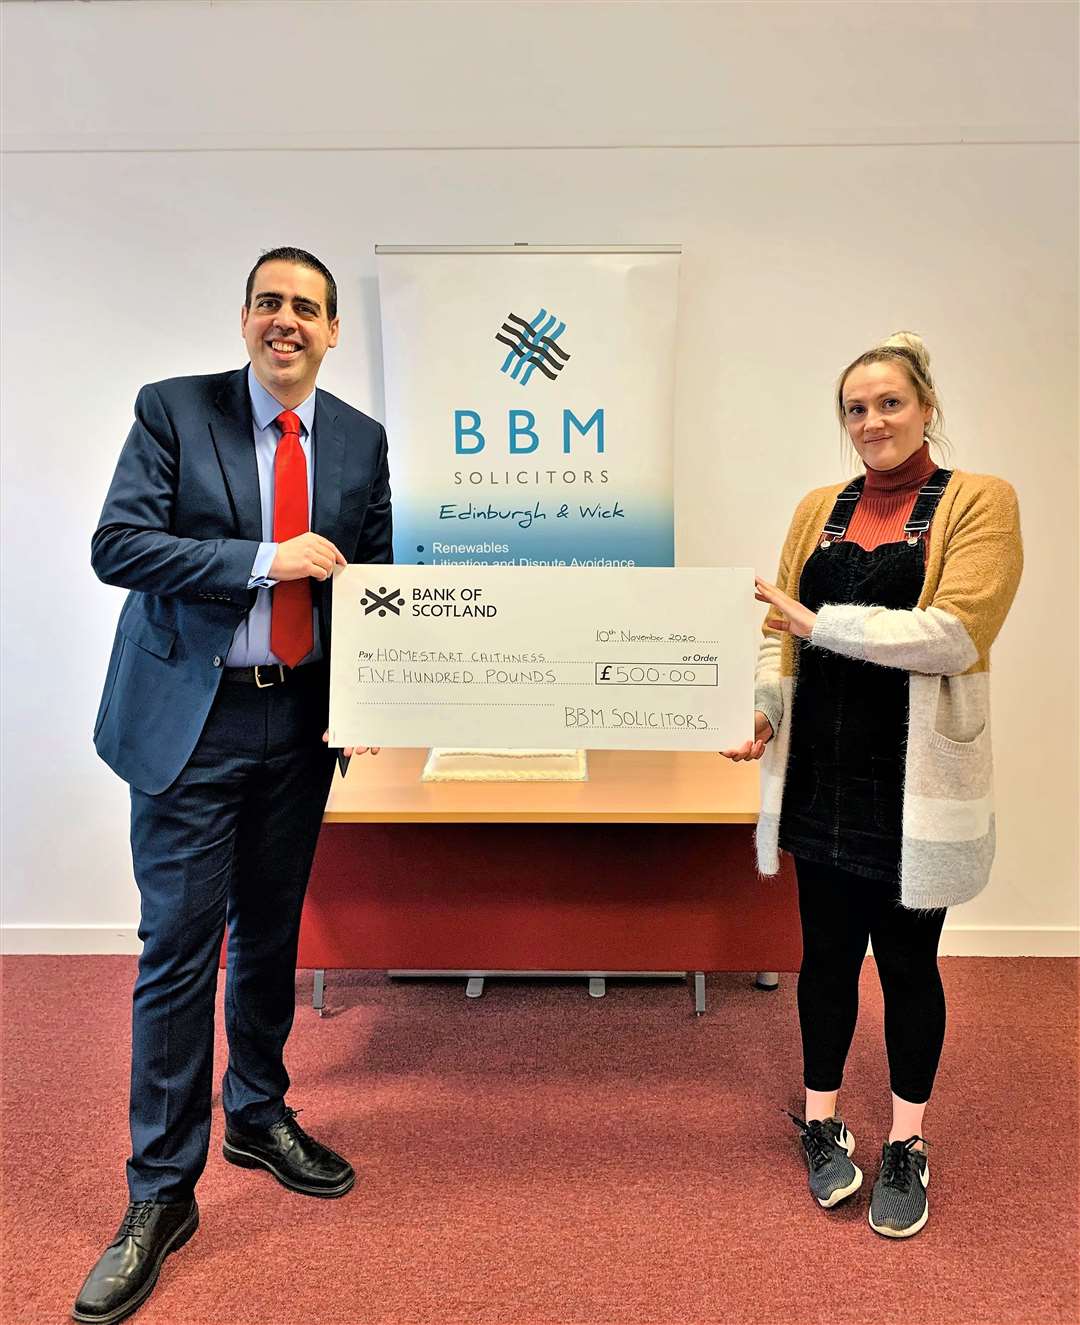 Eric Baijal hands over a £500 charity donation from BBM solicitors to Moira Smith, family services coordinator with Home Start Caithness.